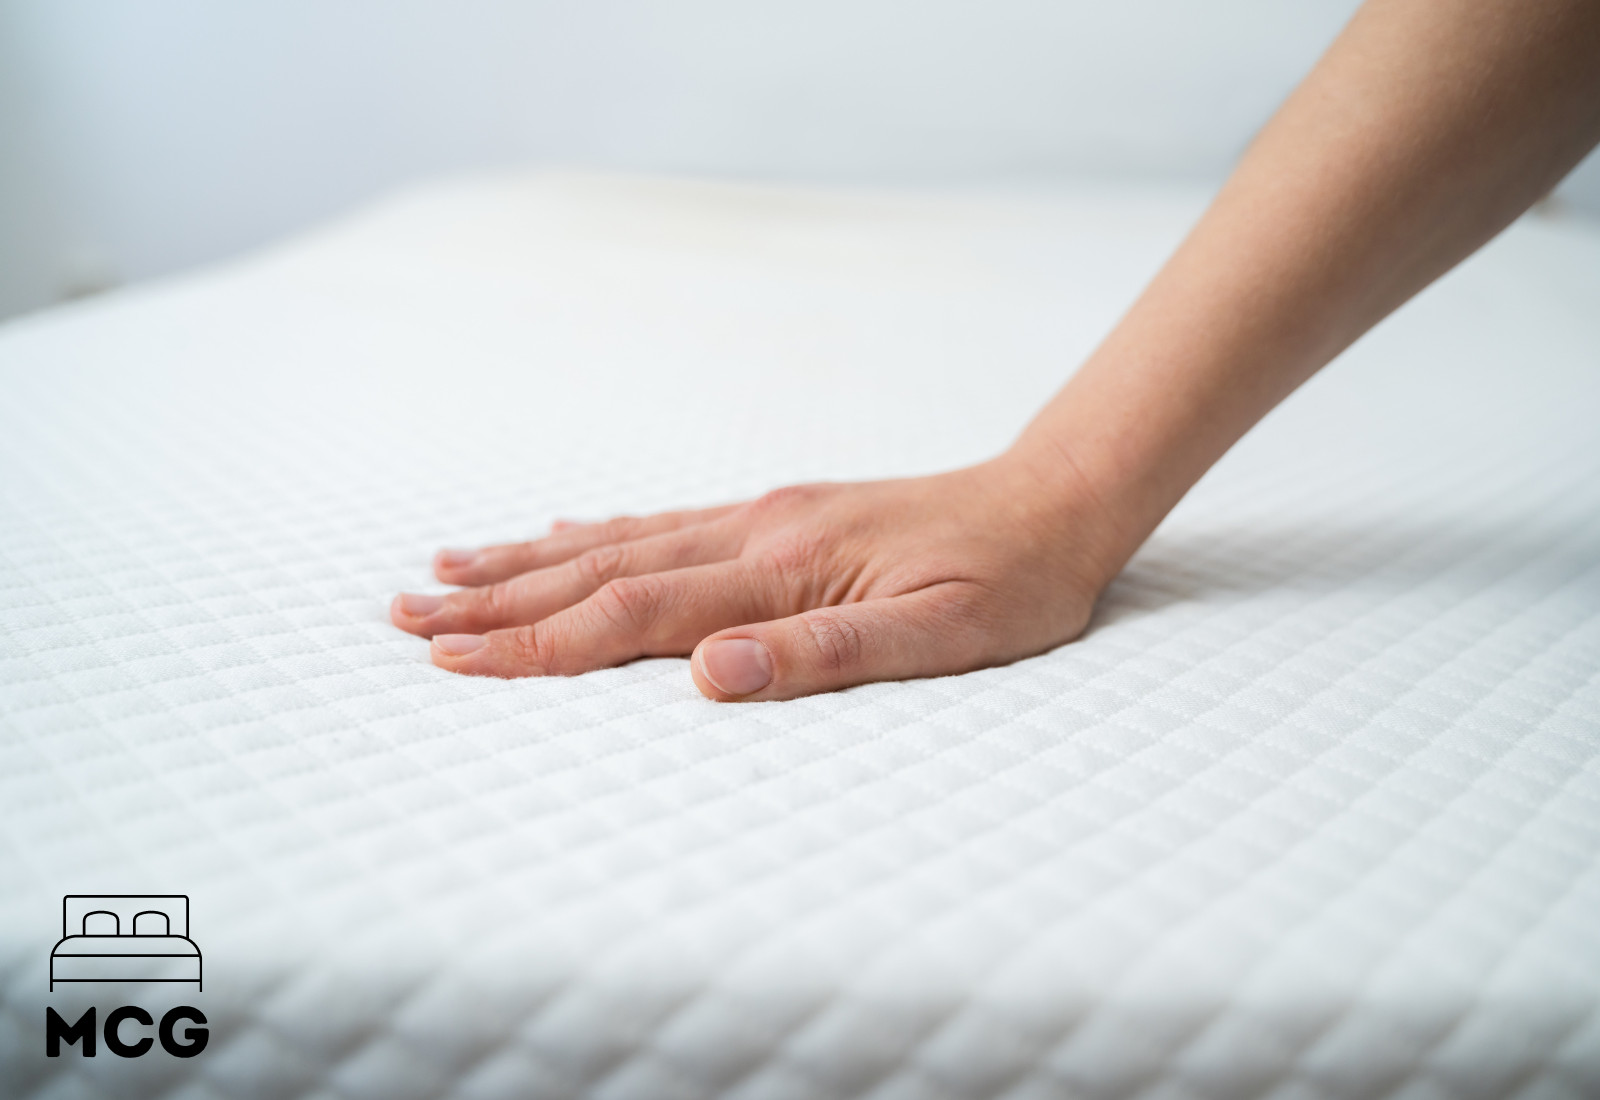 picture of a hand on a mattress protector